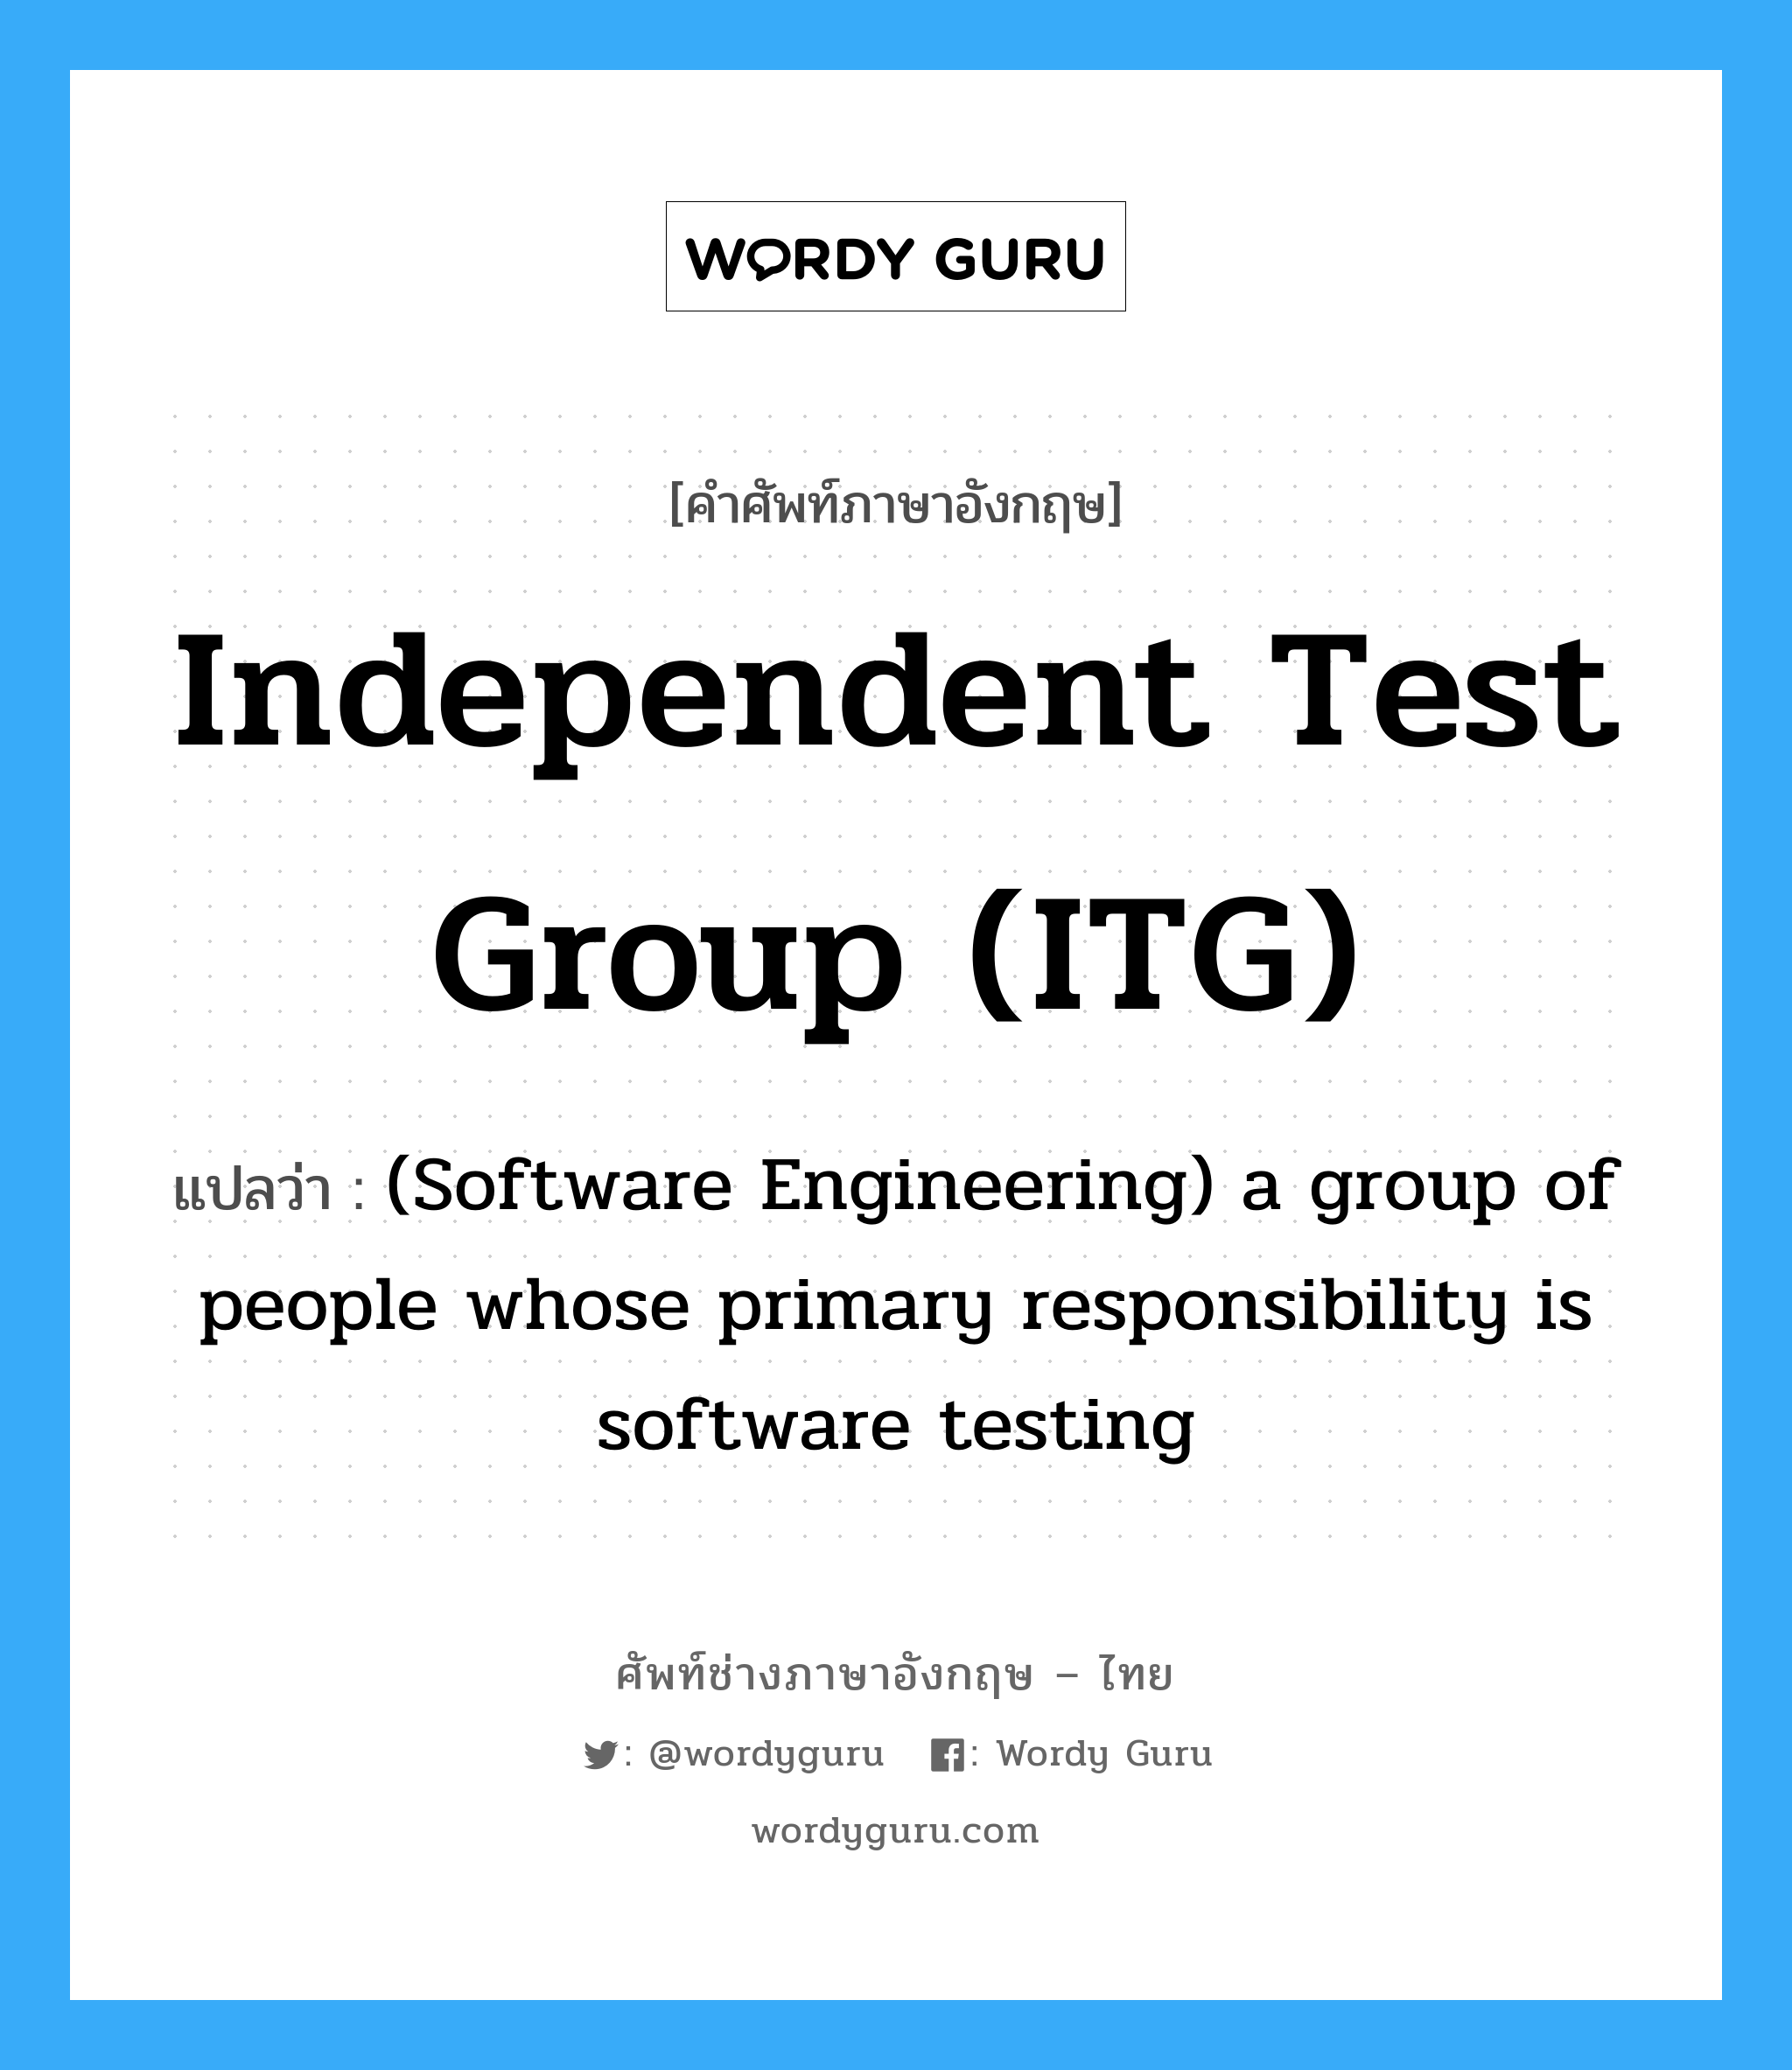 Independent test group (ITG) แปลว่า?, คำศัพท์ช่างภาษาอังกฤษ - ไทย Independent test group (ITG) คำศัพท์ภาษาอังกฤษ Independent test group (ITG) แปลว่า (Software Engineering) a group of people whose primary responsibility is software testing